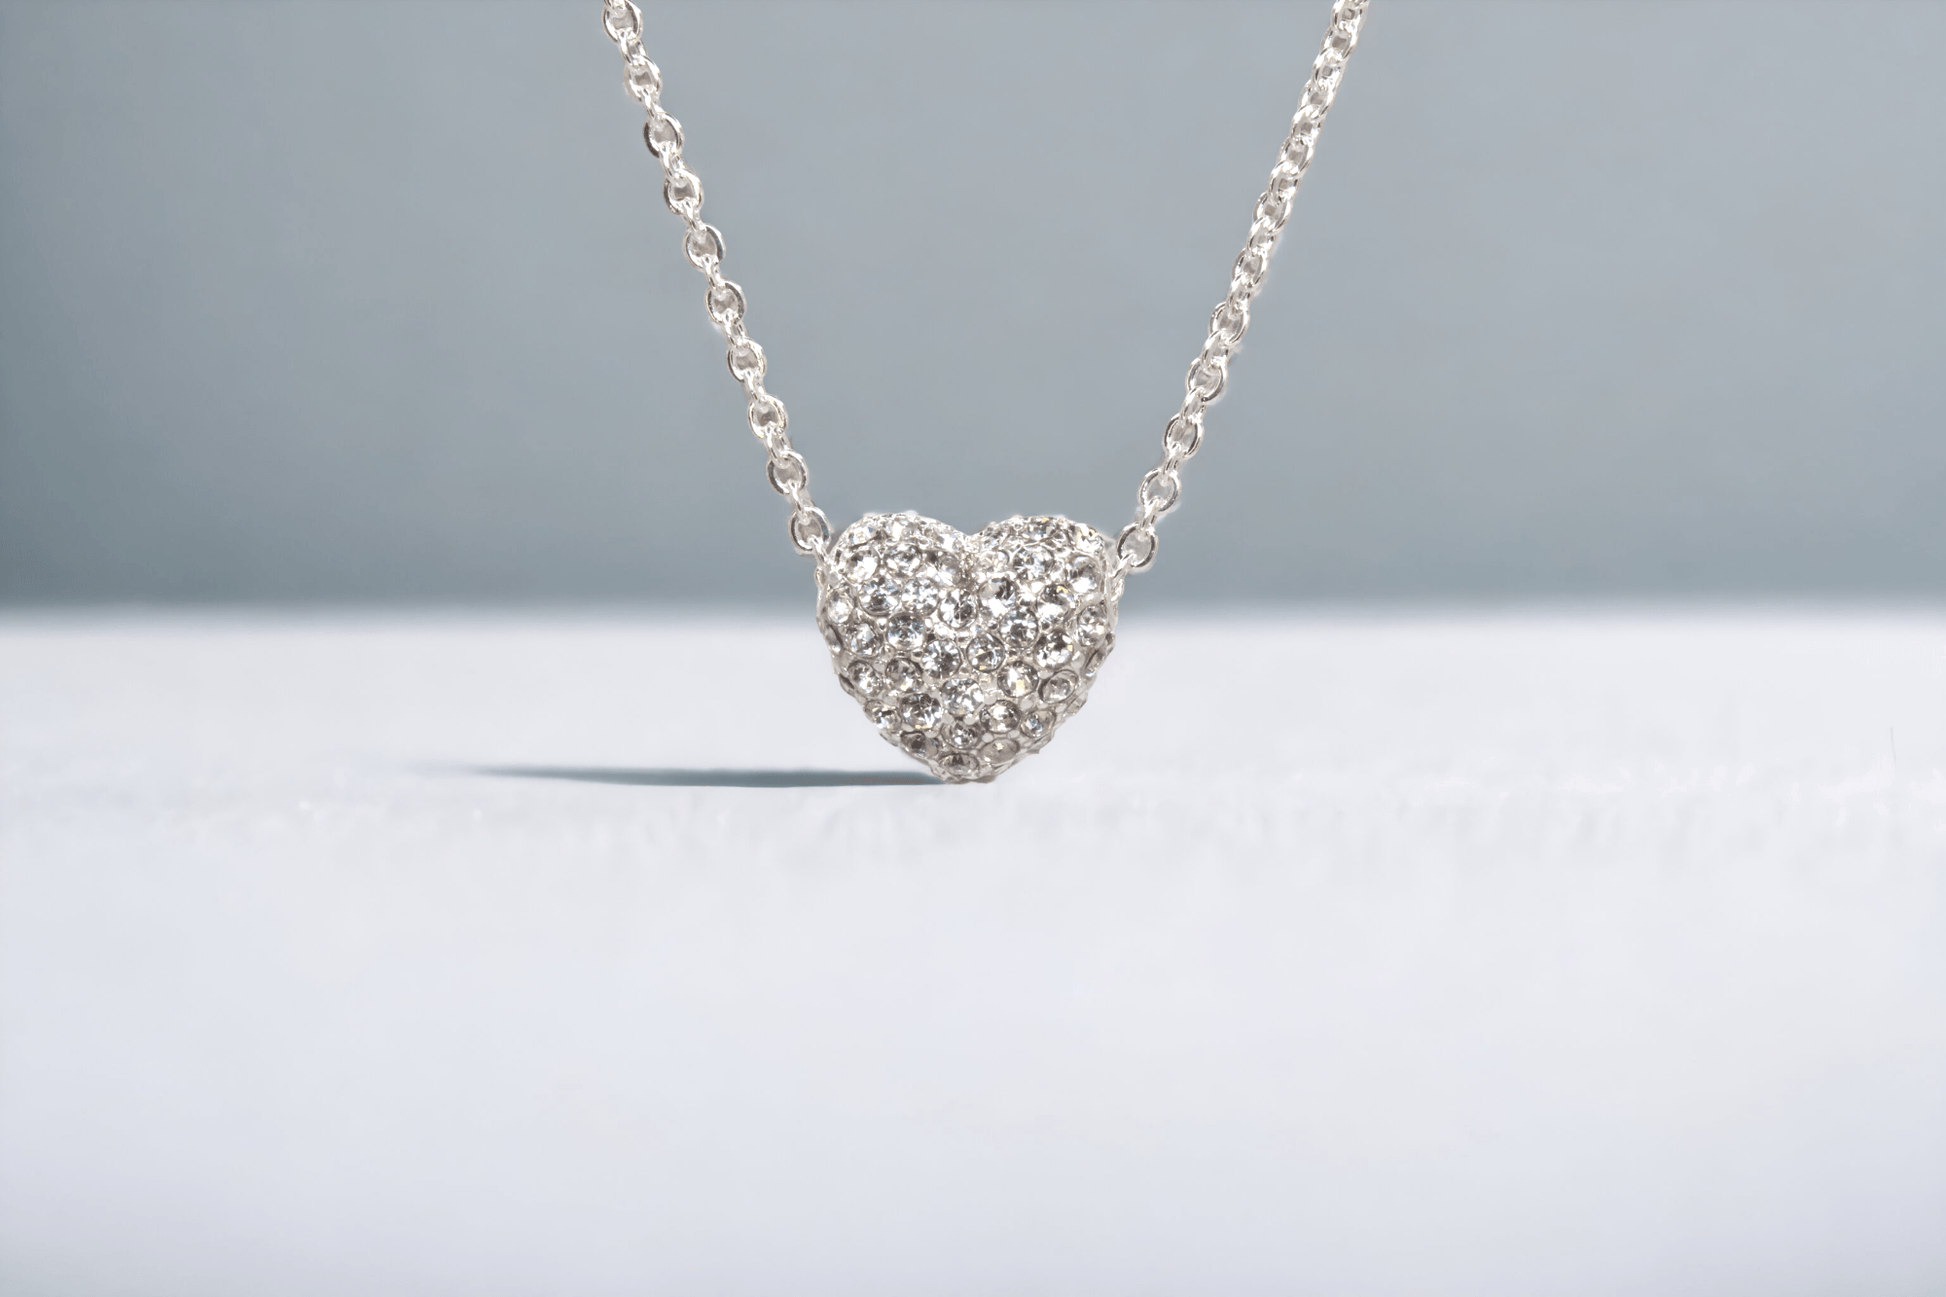 Pave Heart Necklace - J & S Expressions